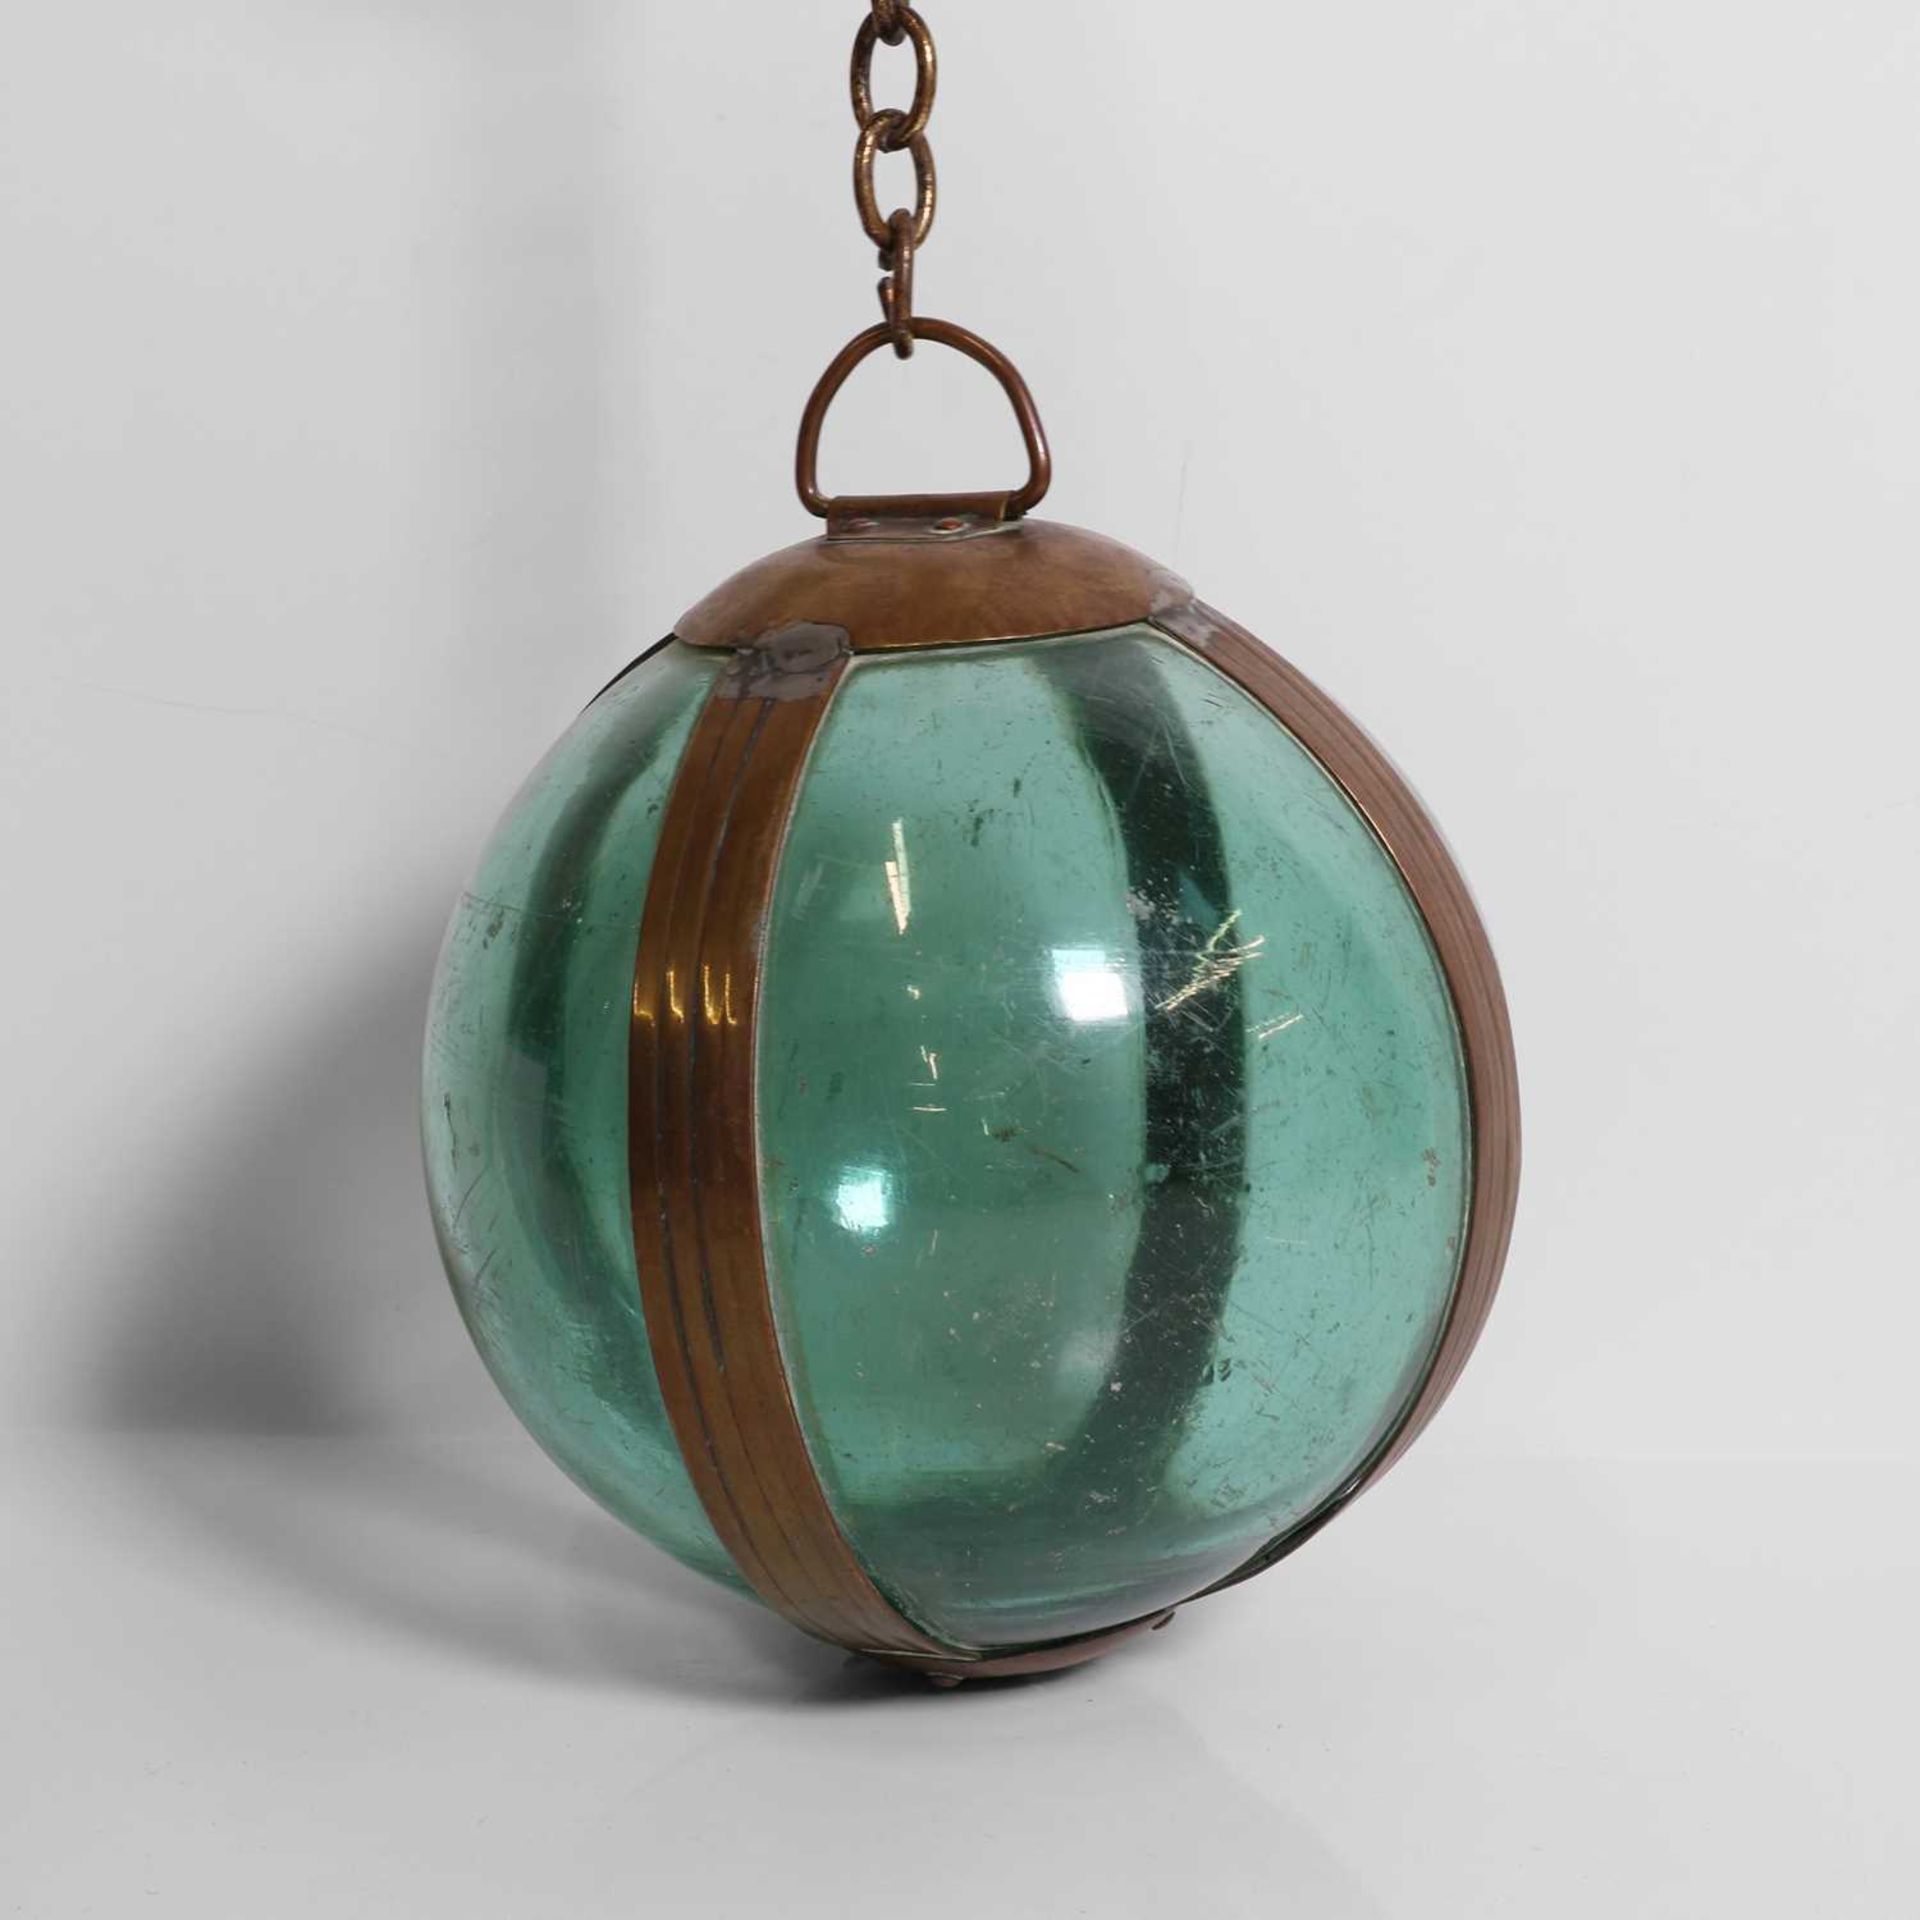 A brass-mounted pale-green glass buoy or fishing float, - Image 4 of 7